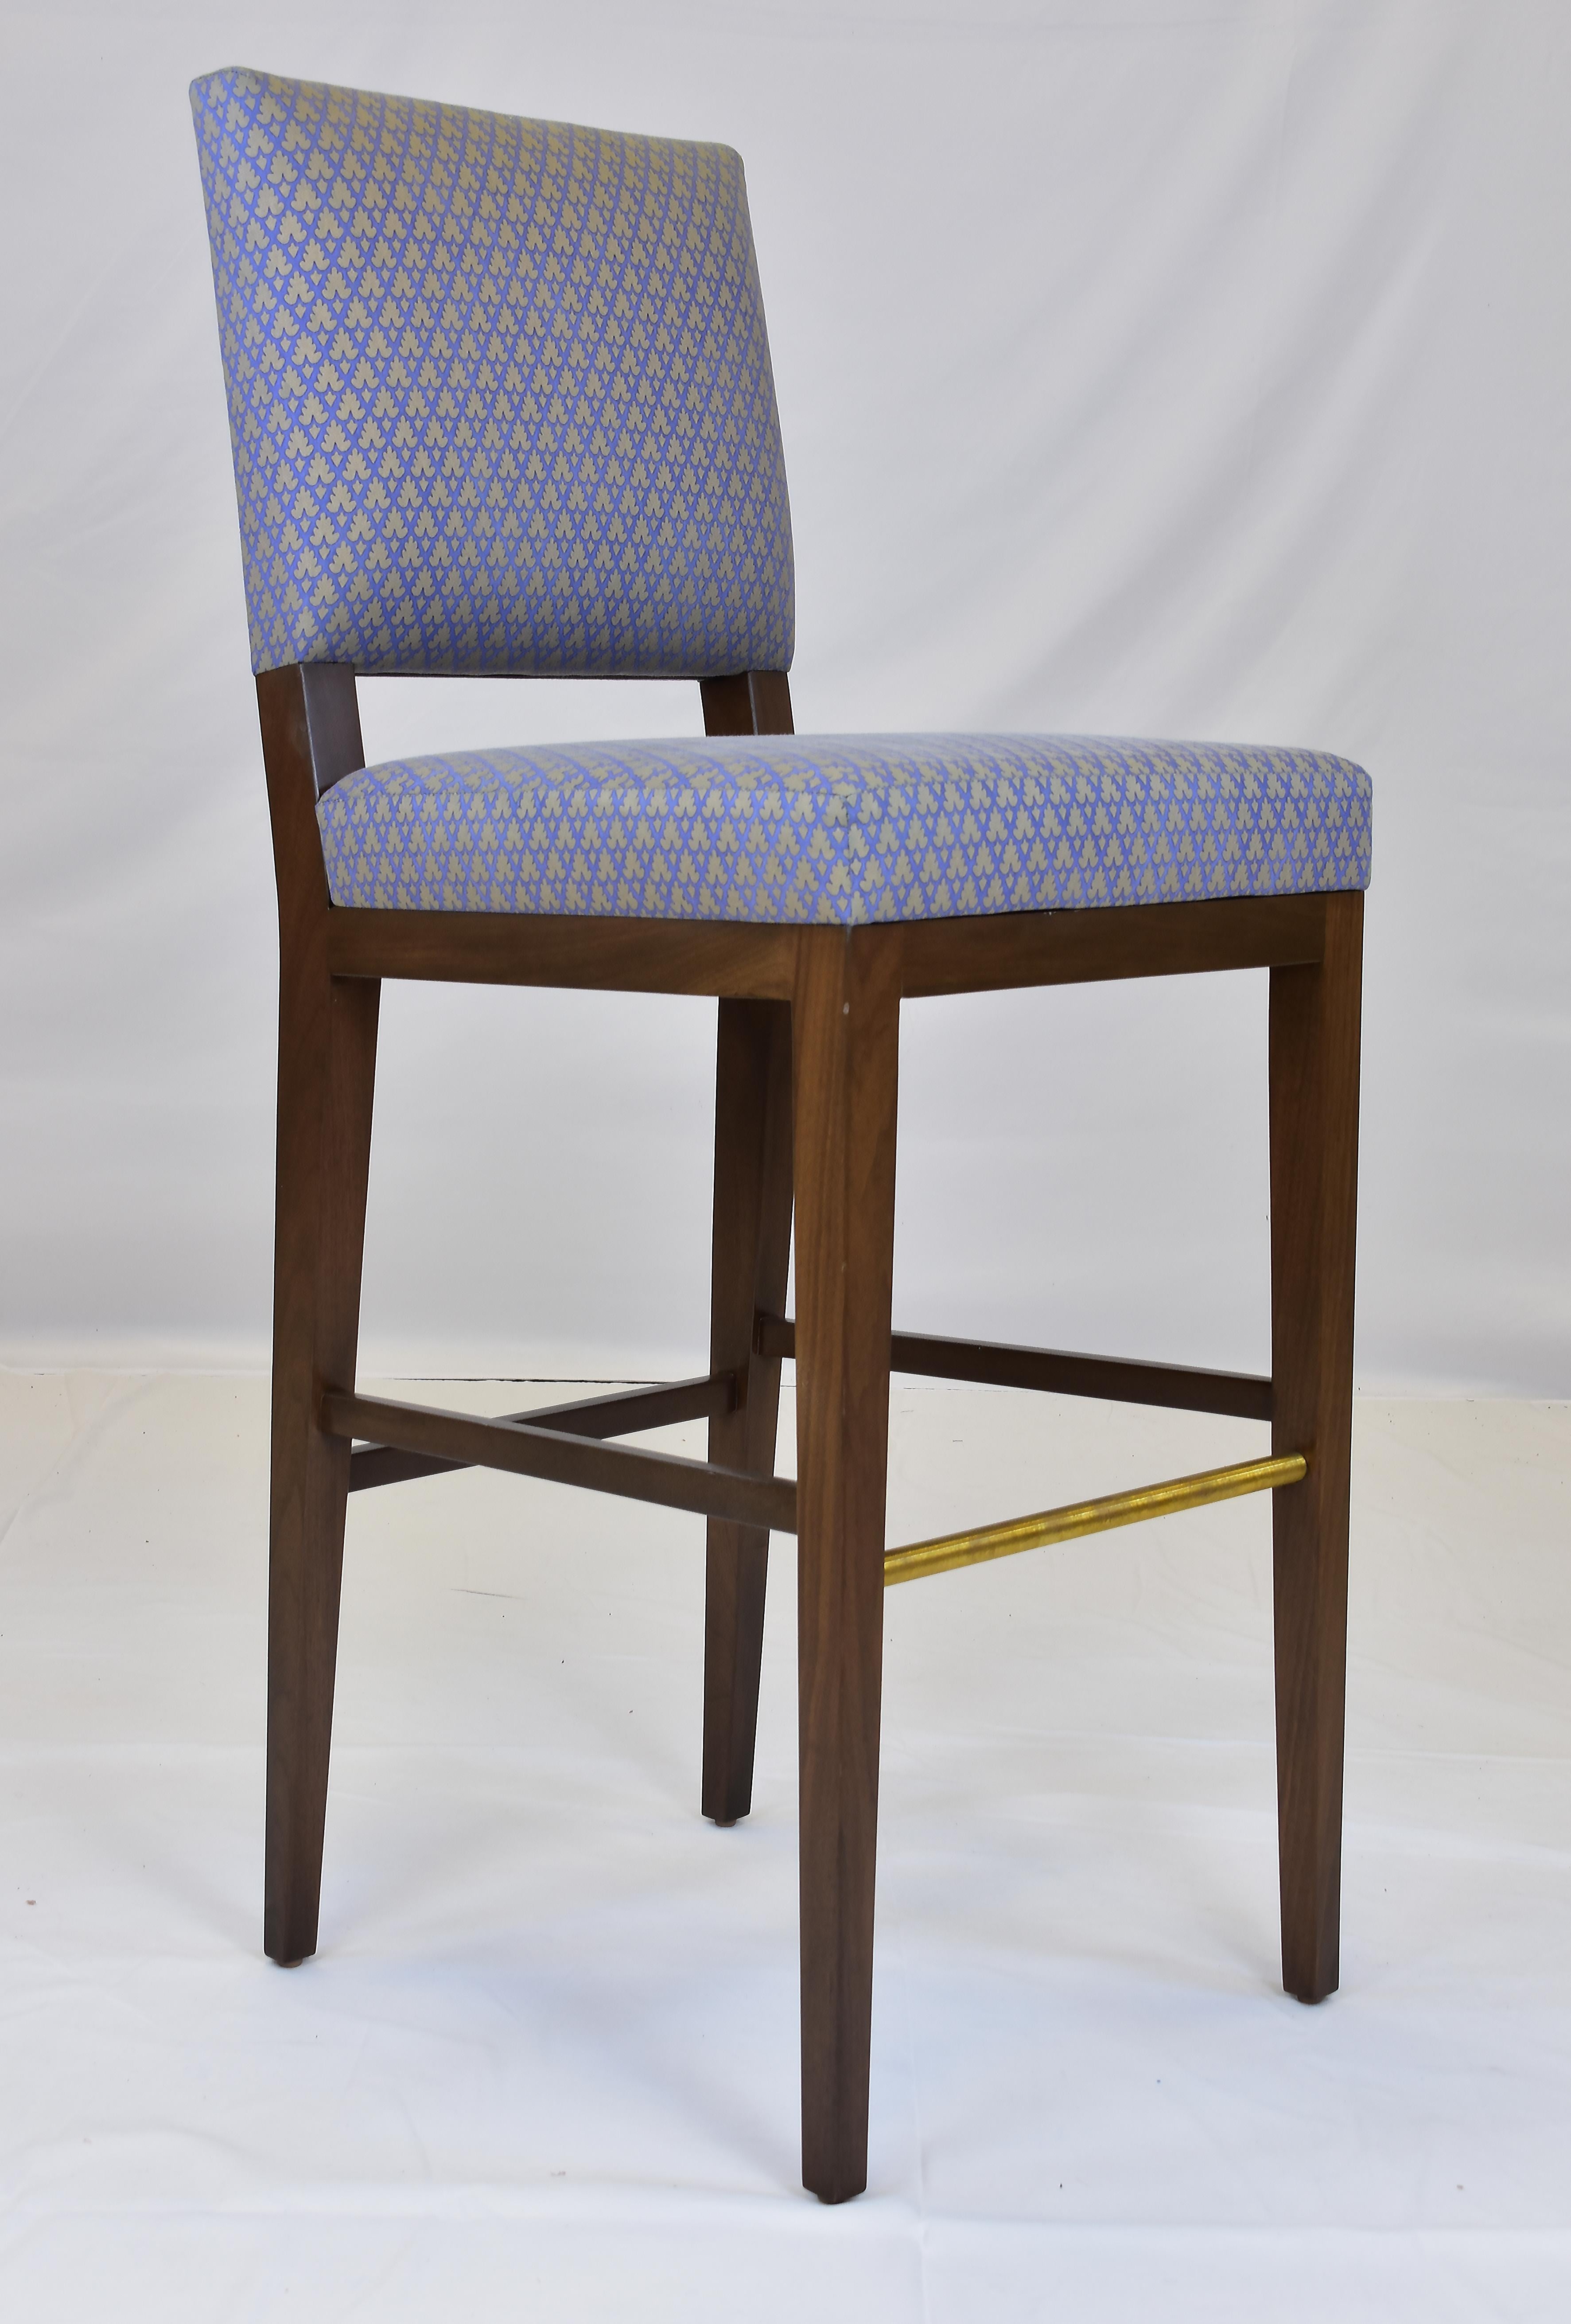 Le Jeune Upholstery Barista Barstool with Brass, Showroom Models, Per Item In Good Condition For Sale In Miami, FL